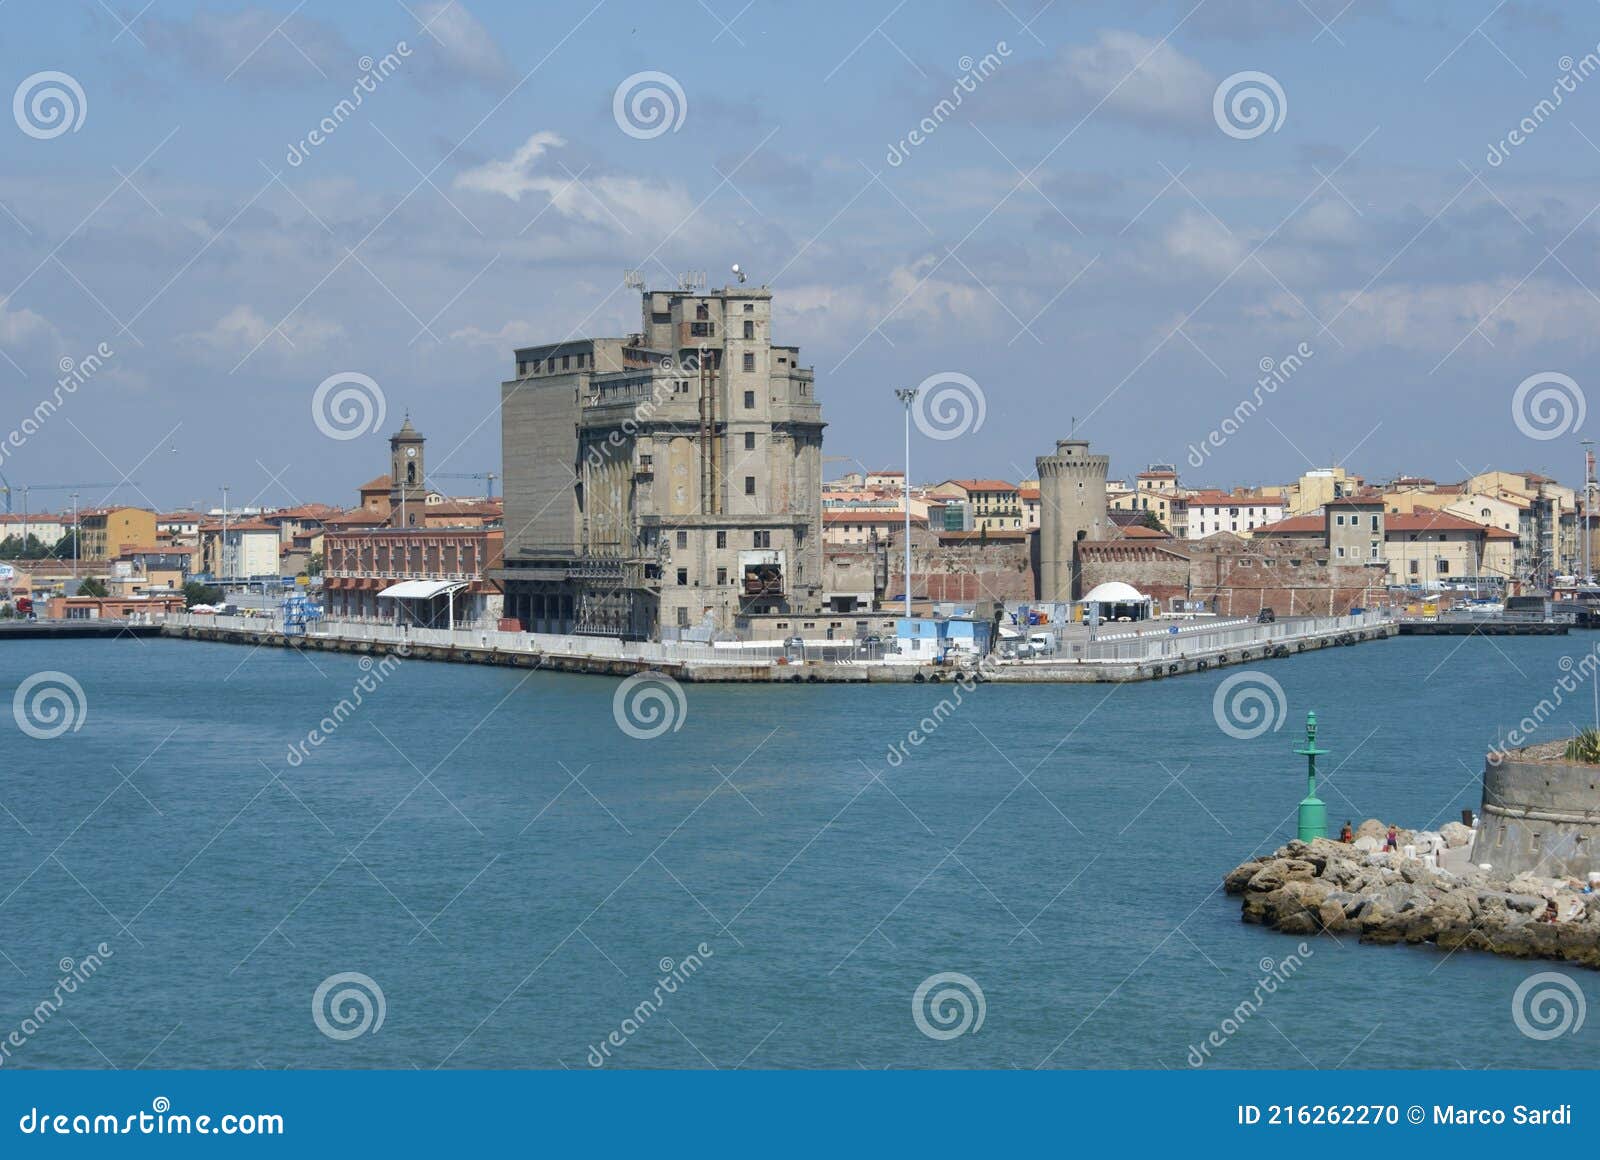 the old grain silos and the old fortress in the port of livorno, italy